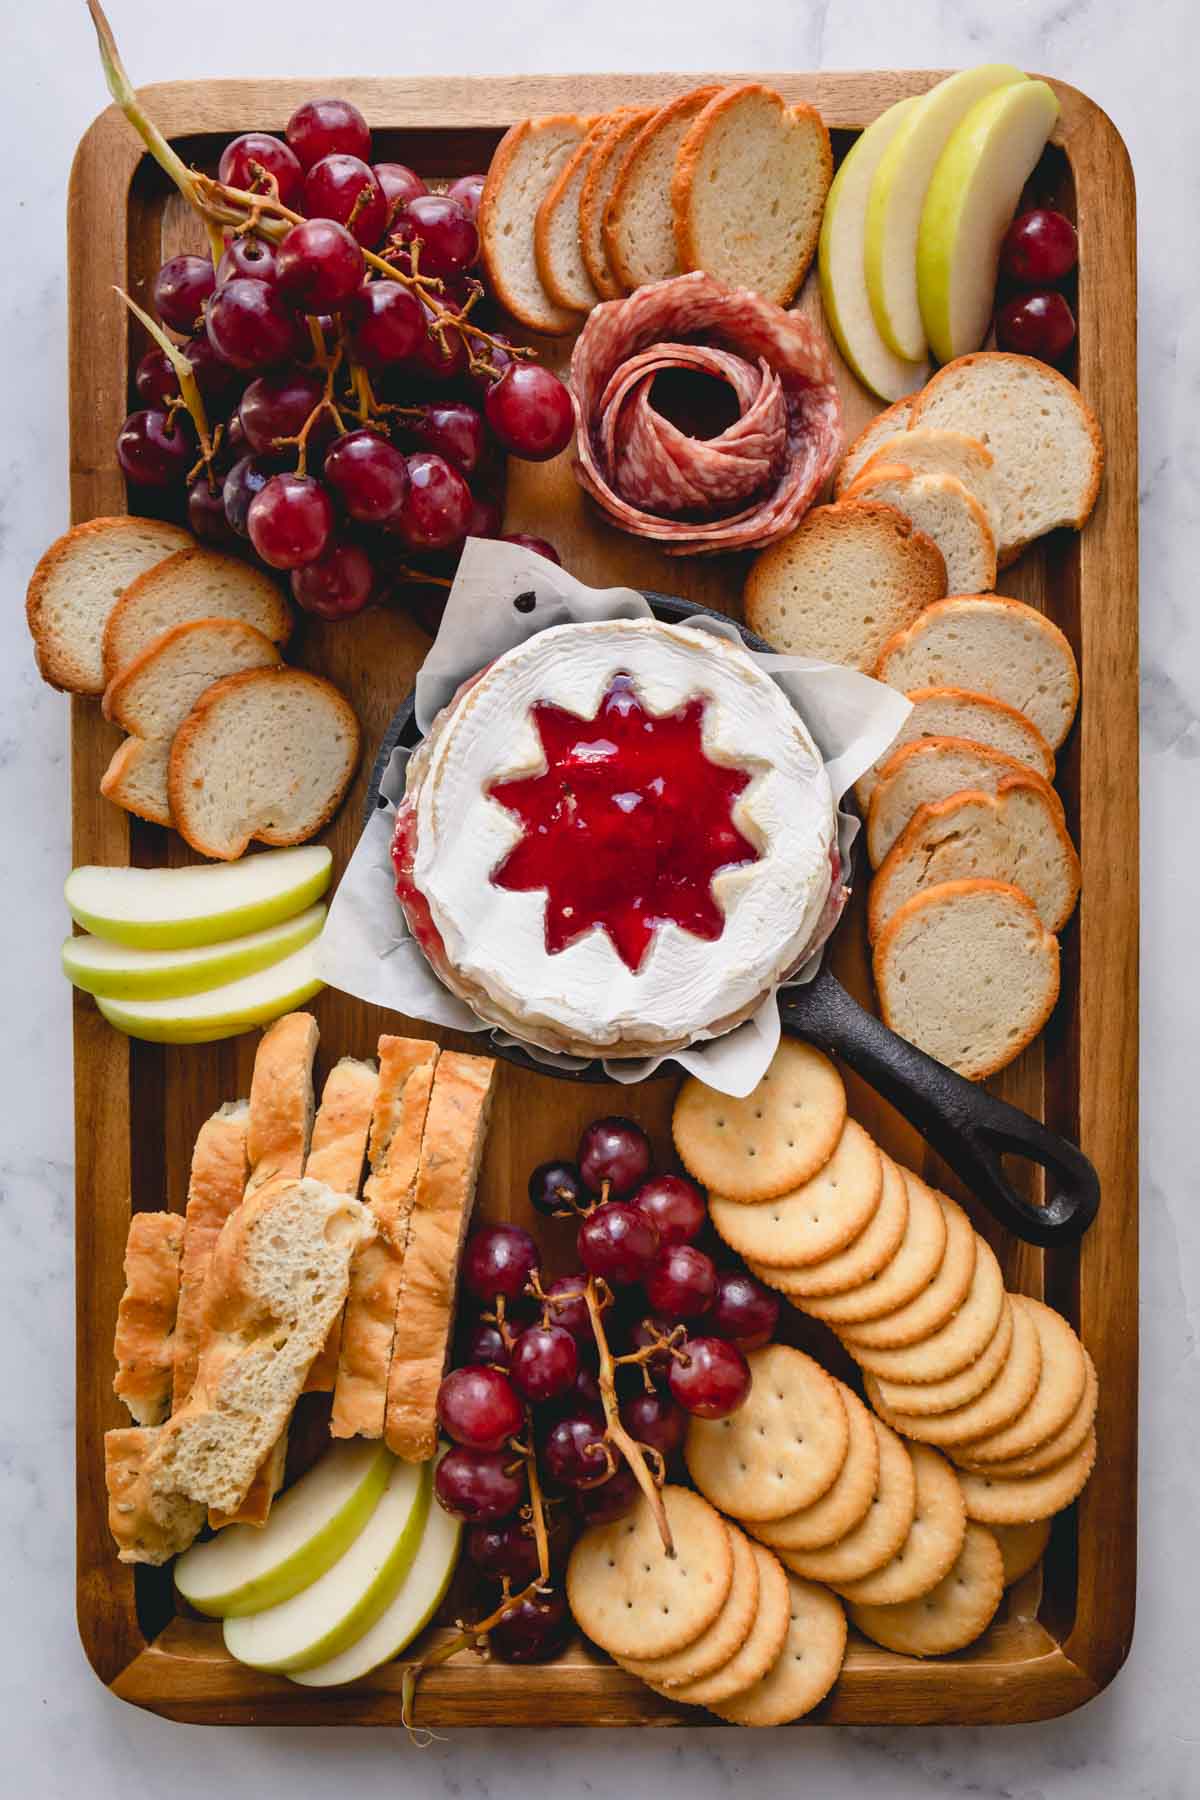 Cheese board with a raspberry baked brie in the middle.